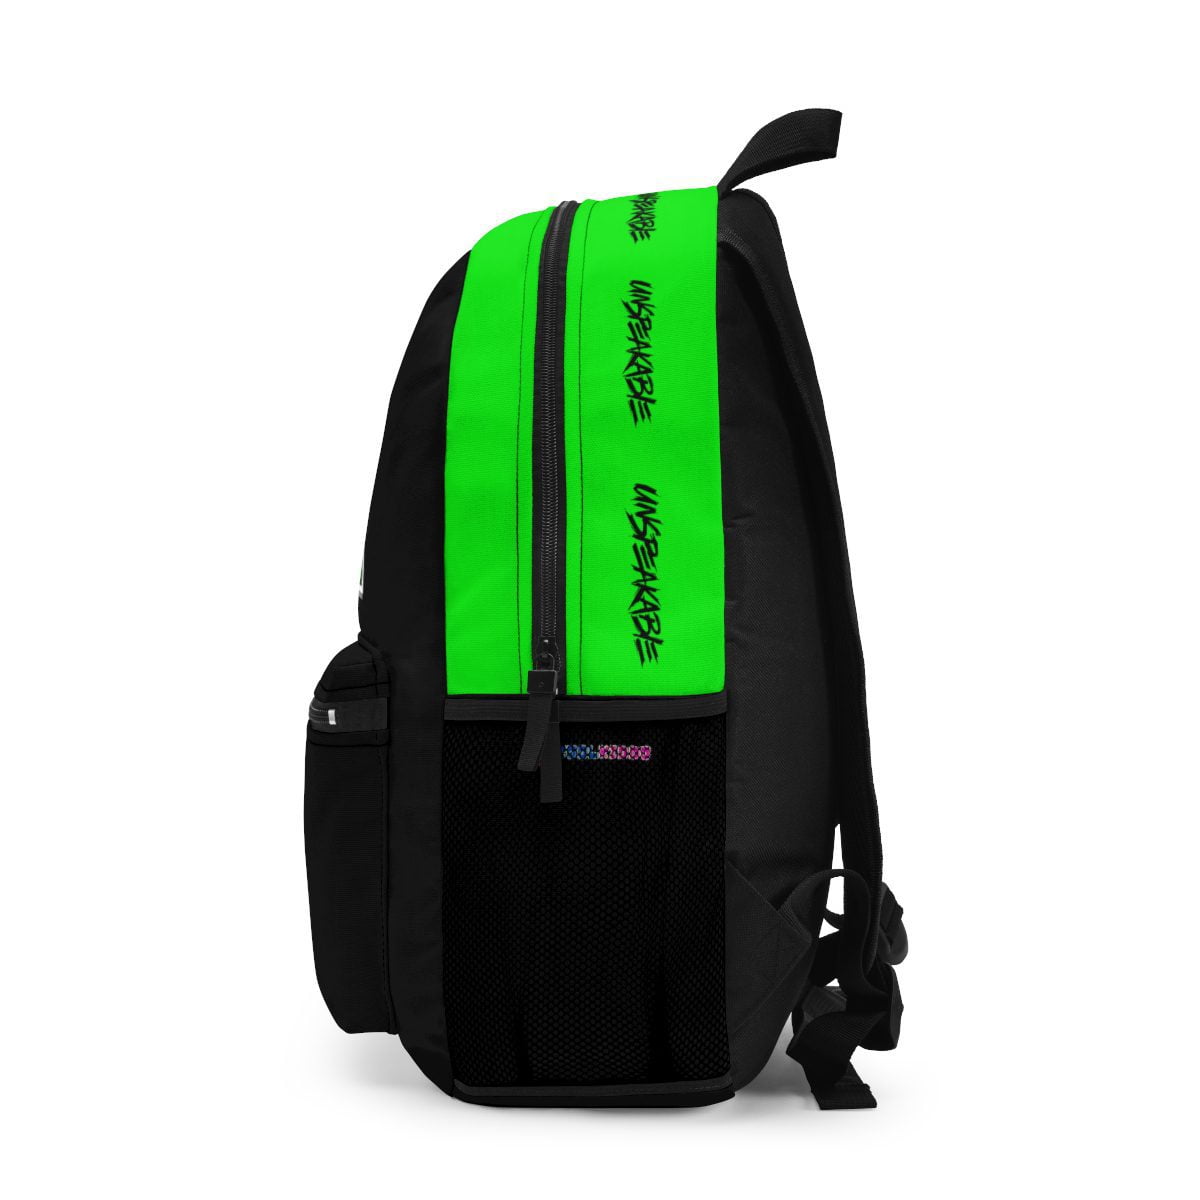 Unspeakable Gaming YouTube Channel Backpack in Black and Neon Green Cool Kiddo 19